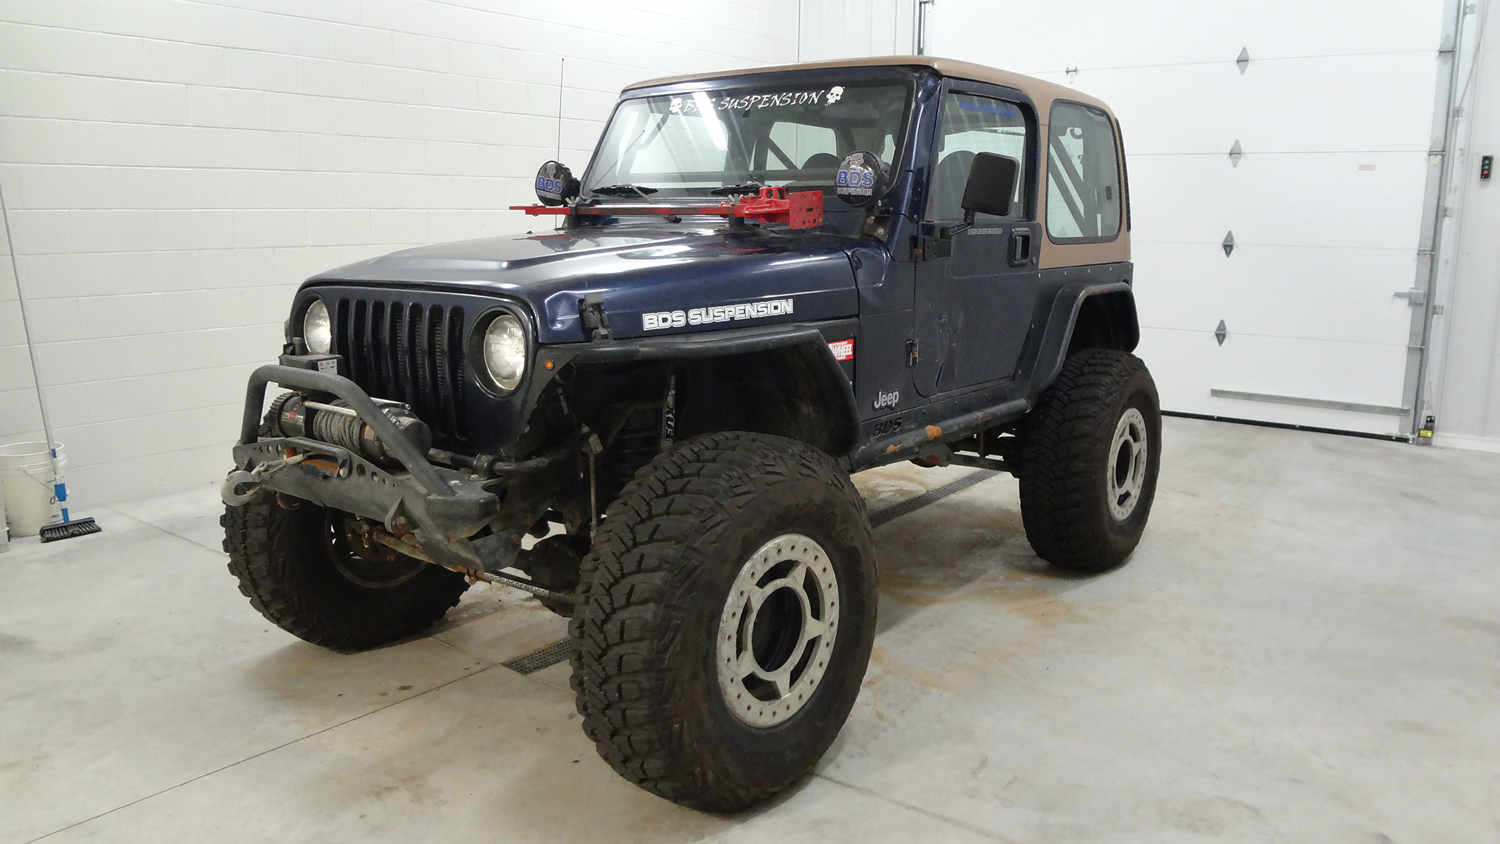 1997 Jeep TJ with BDS Suspension Survived Two Ultimate Adventures! 